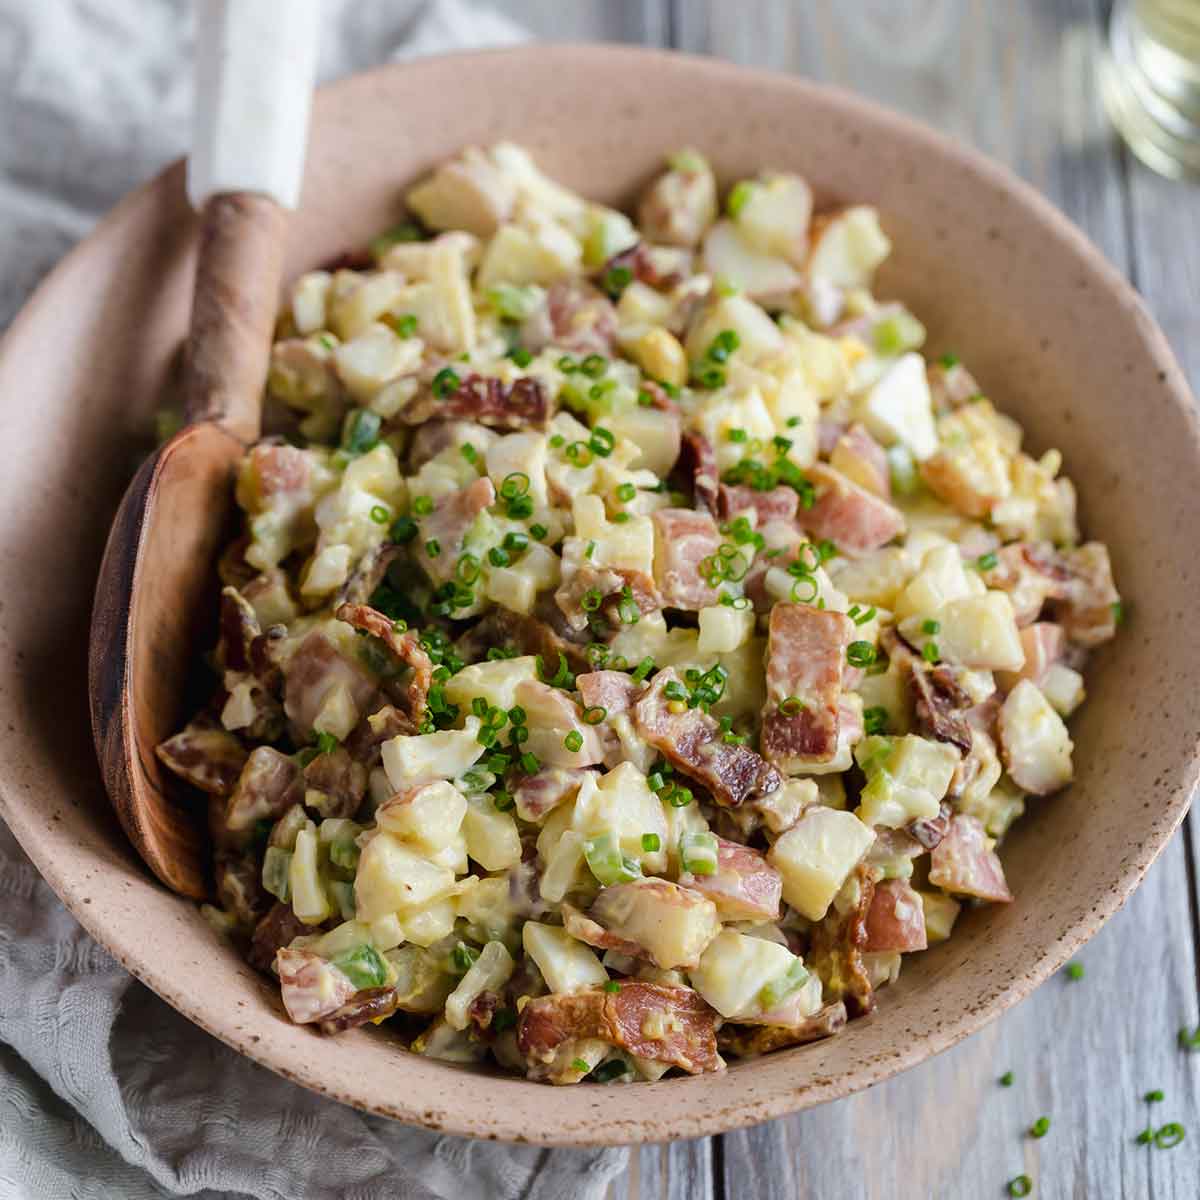 Potato salad in a serving bowl with a serving spoon alongside.